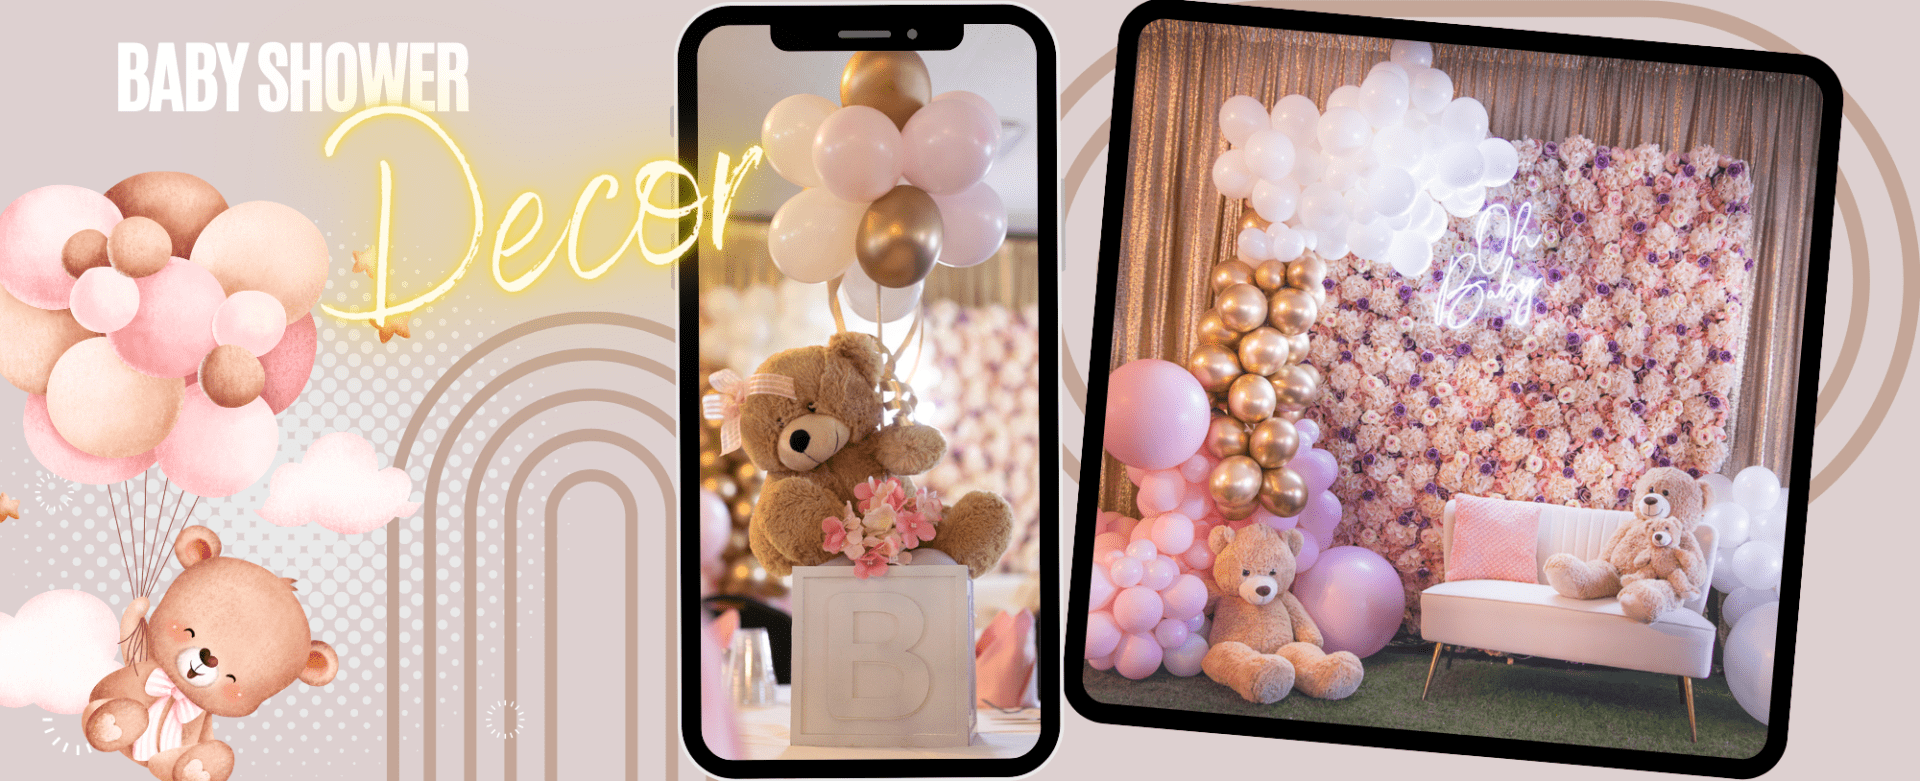 Party Town Decor Baby Shower Decorations